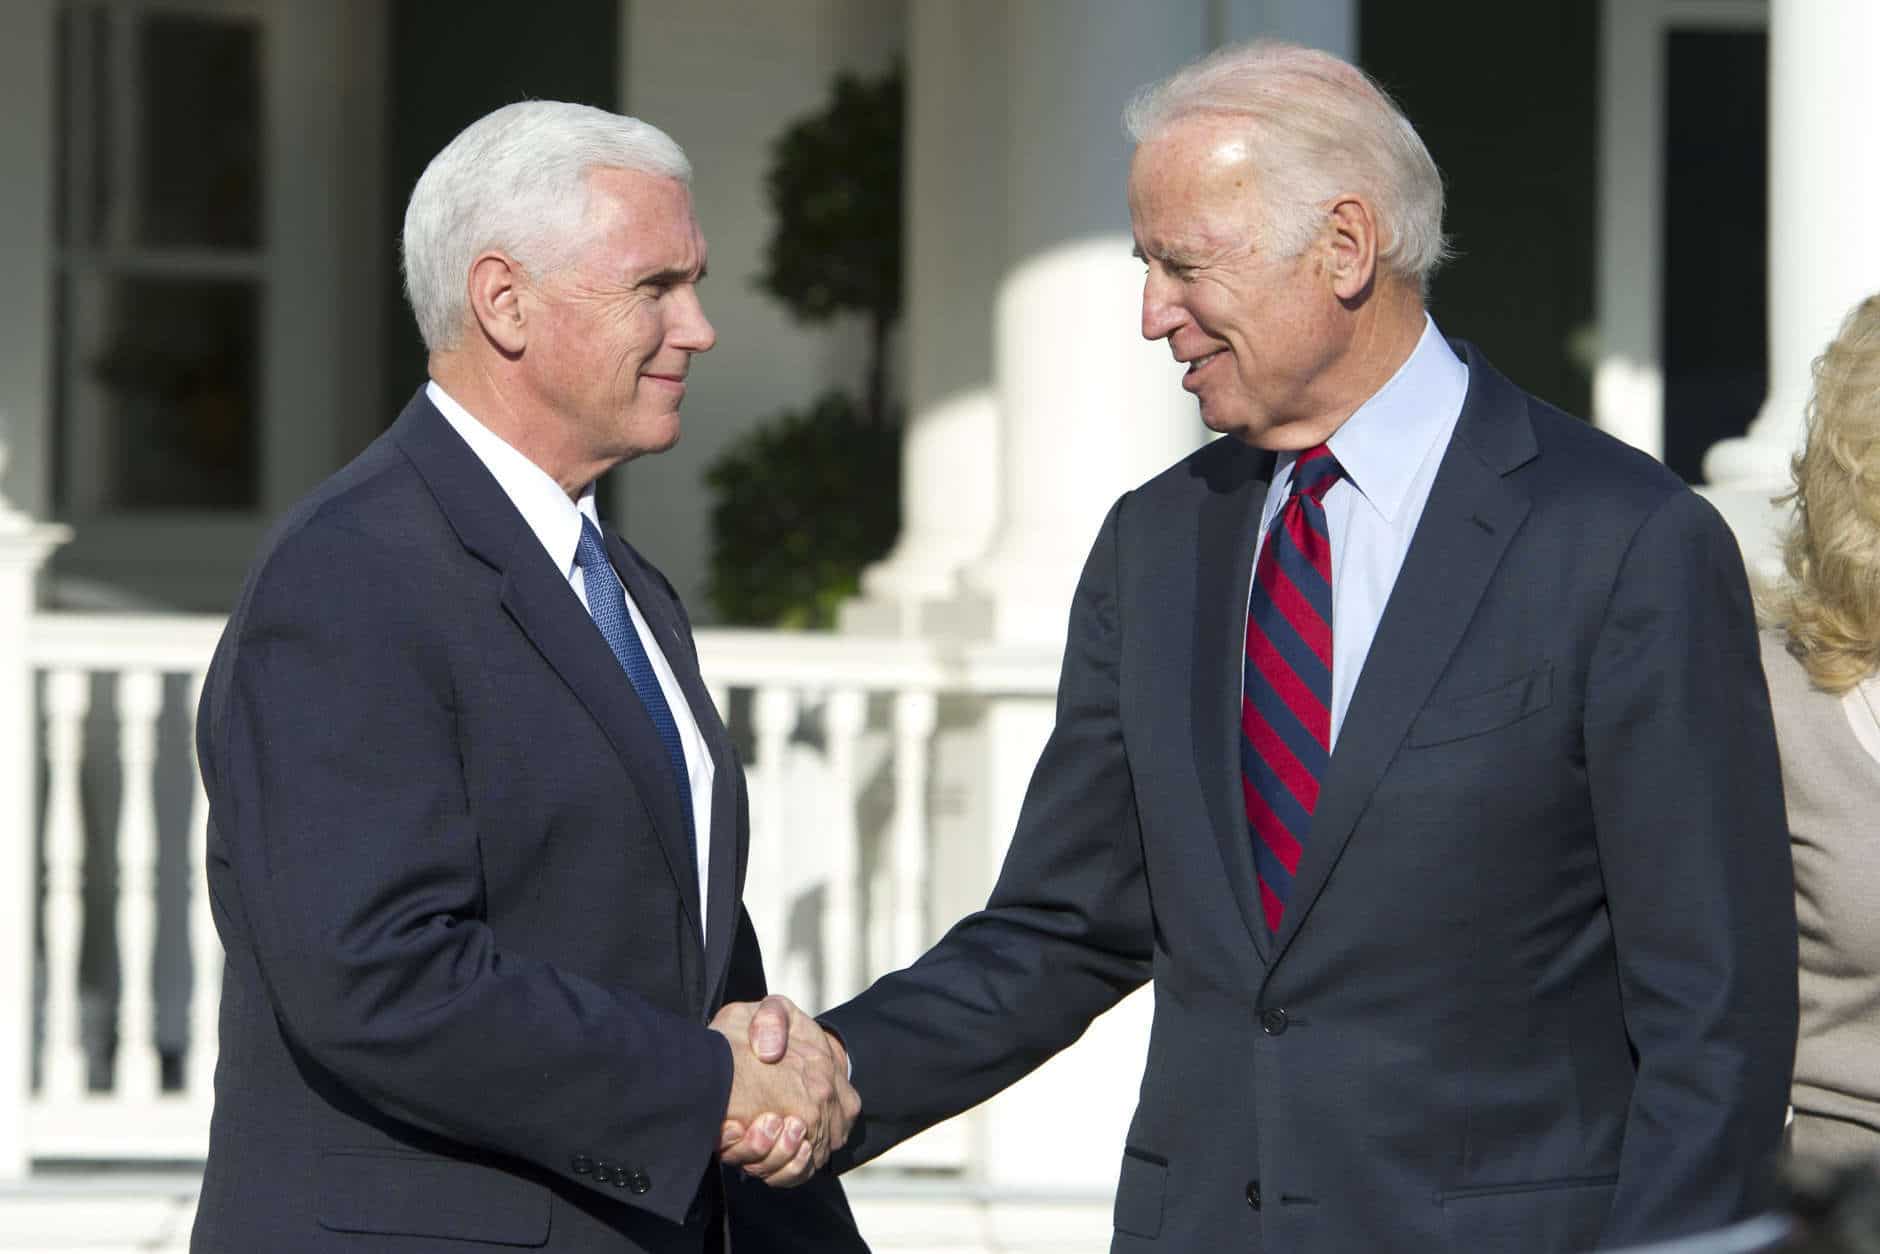 Vice President Joe Biden shakes hands with Vice President-elect Mike Pence after they had lunch at the Vice President's residence, the Naval Observatory, in Washington, Wednesday, Nov. 16, 2016. (AP Photo/Cliff Owen)